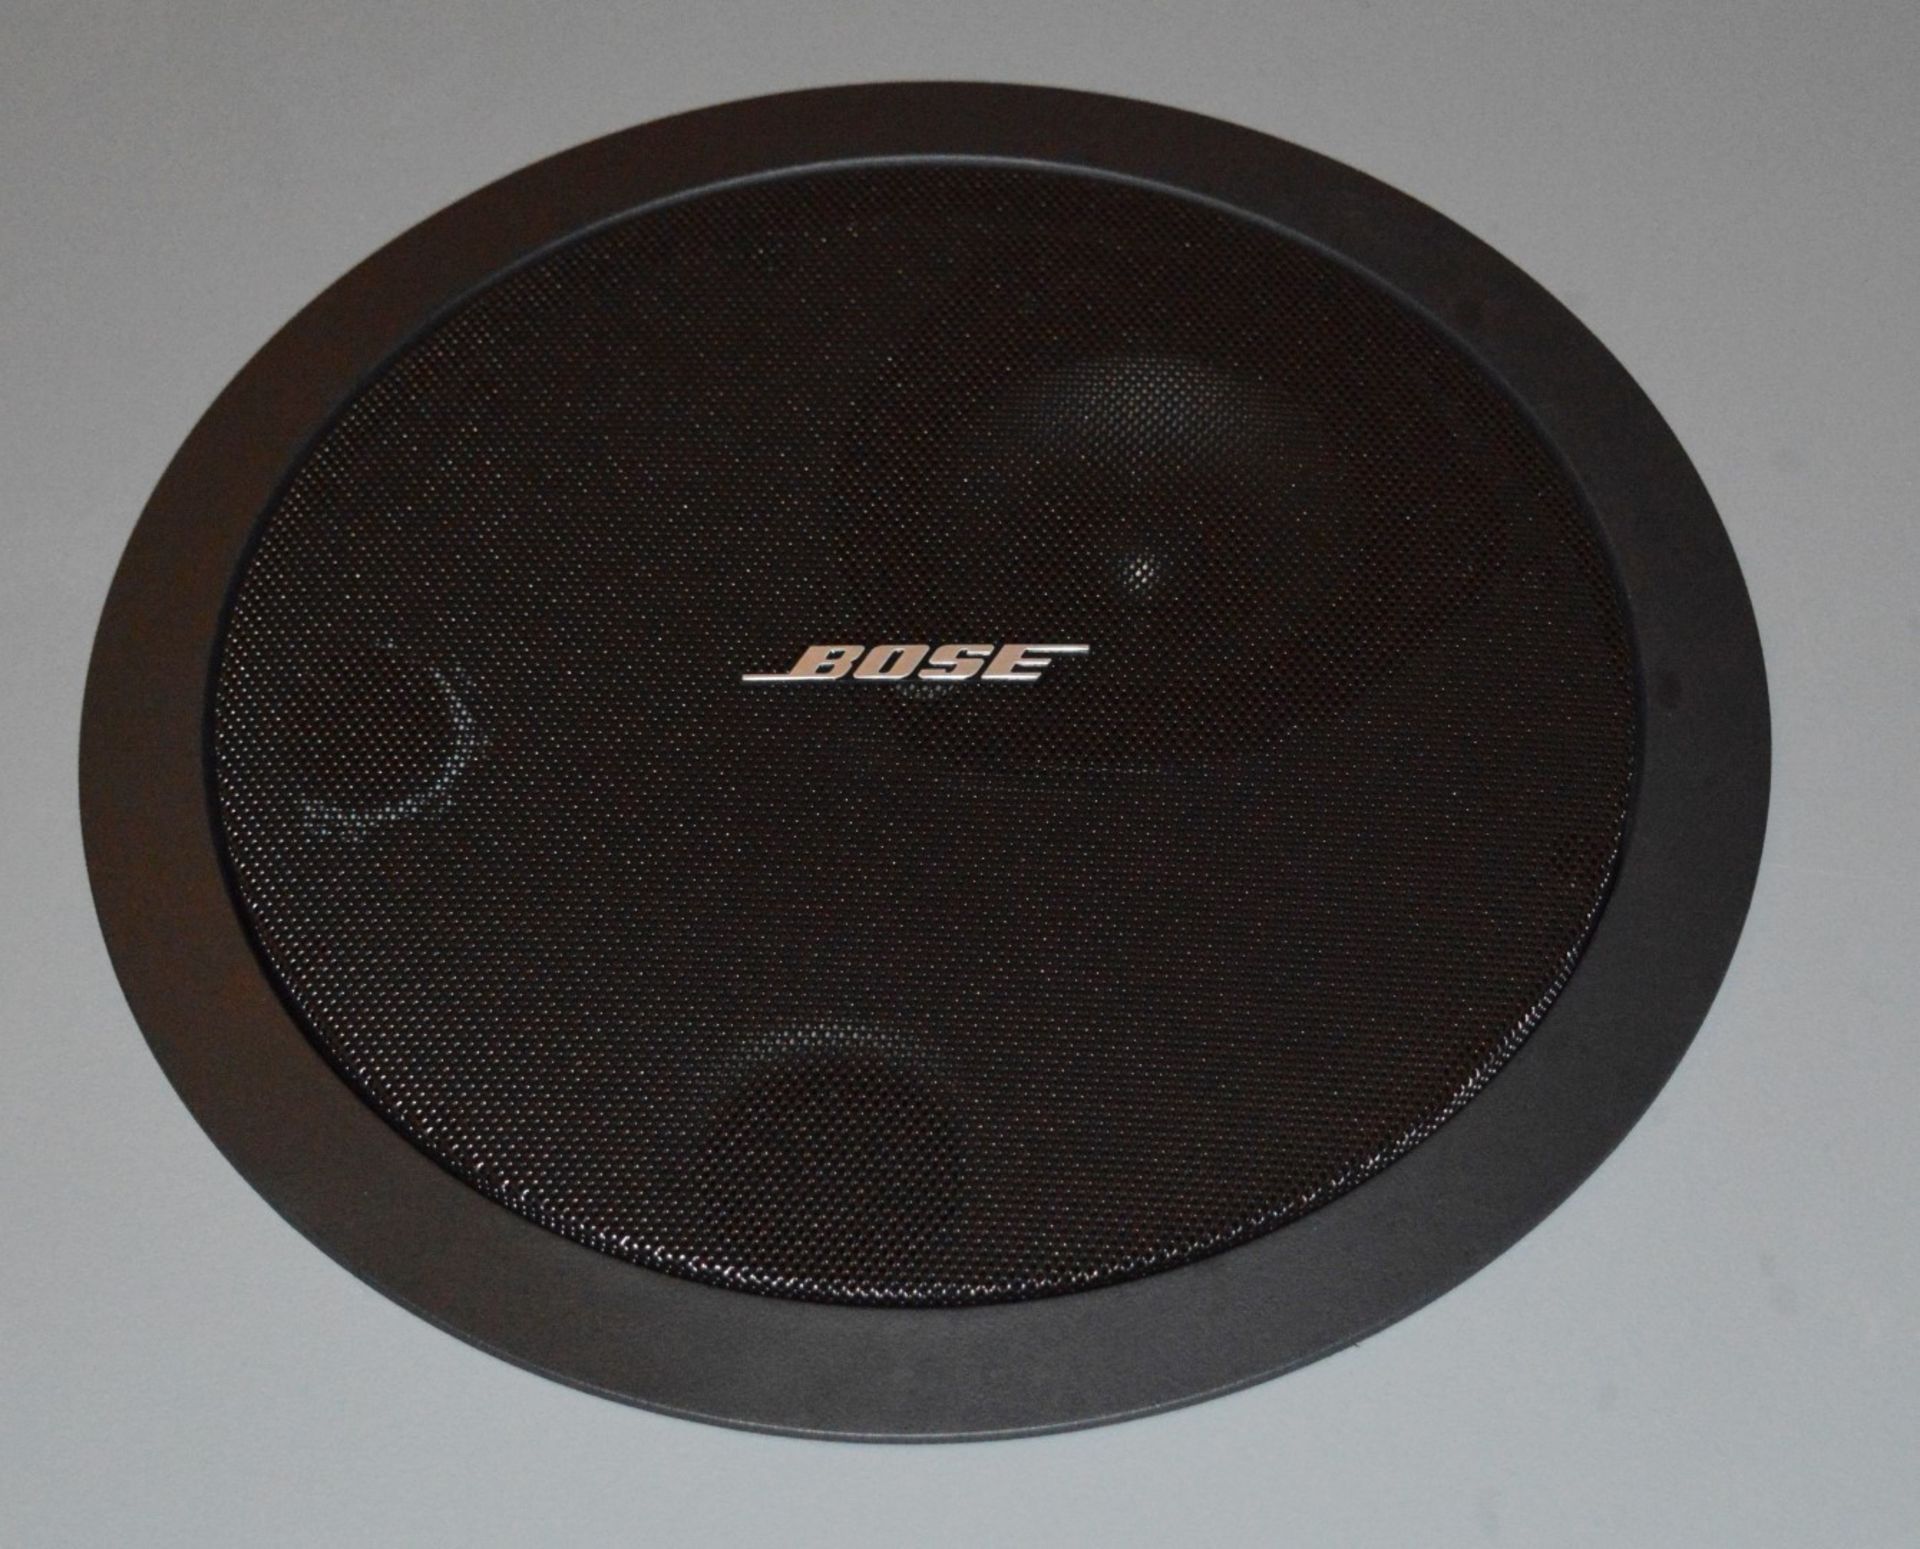 1 x Bose Freespace 9 Piece Speaker System - Includes 2 x Round Ceiling Speakers, 4 x Satellite